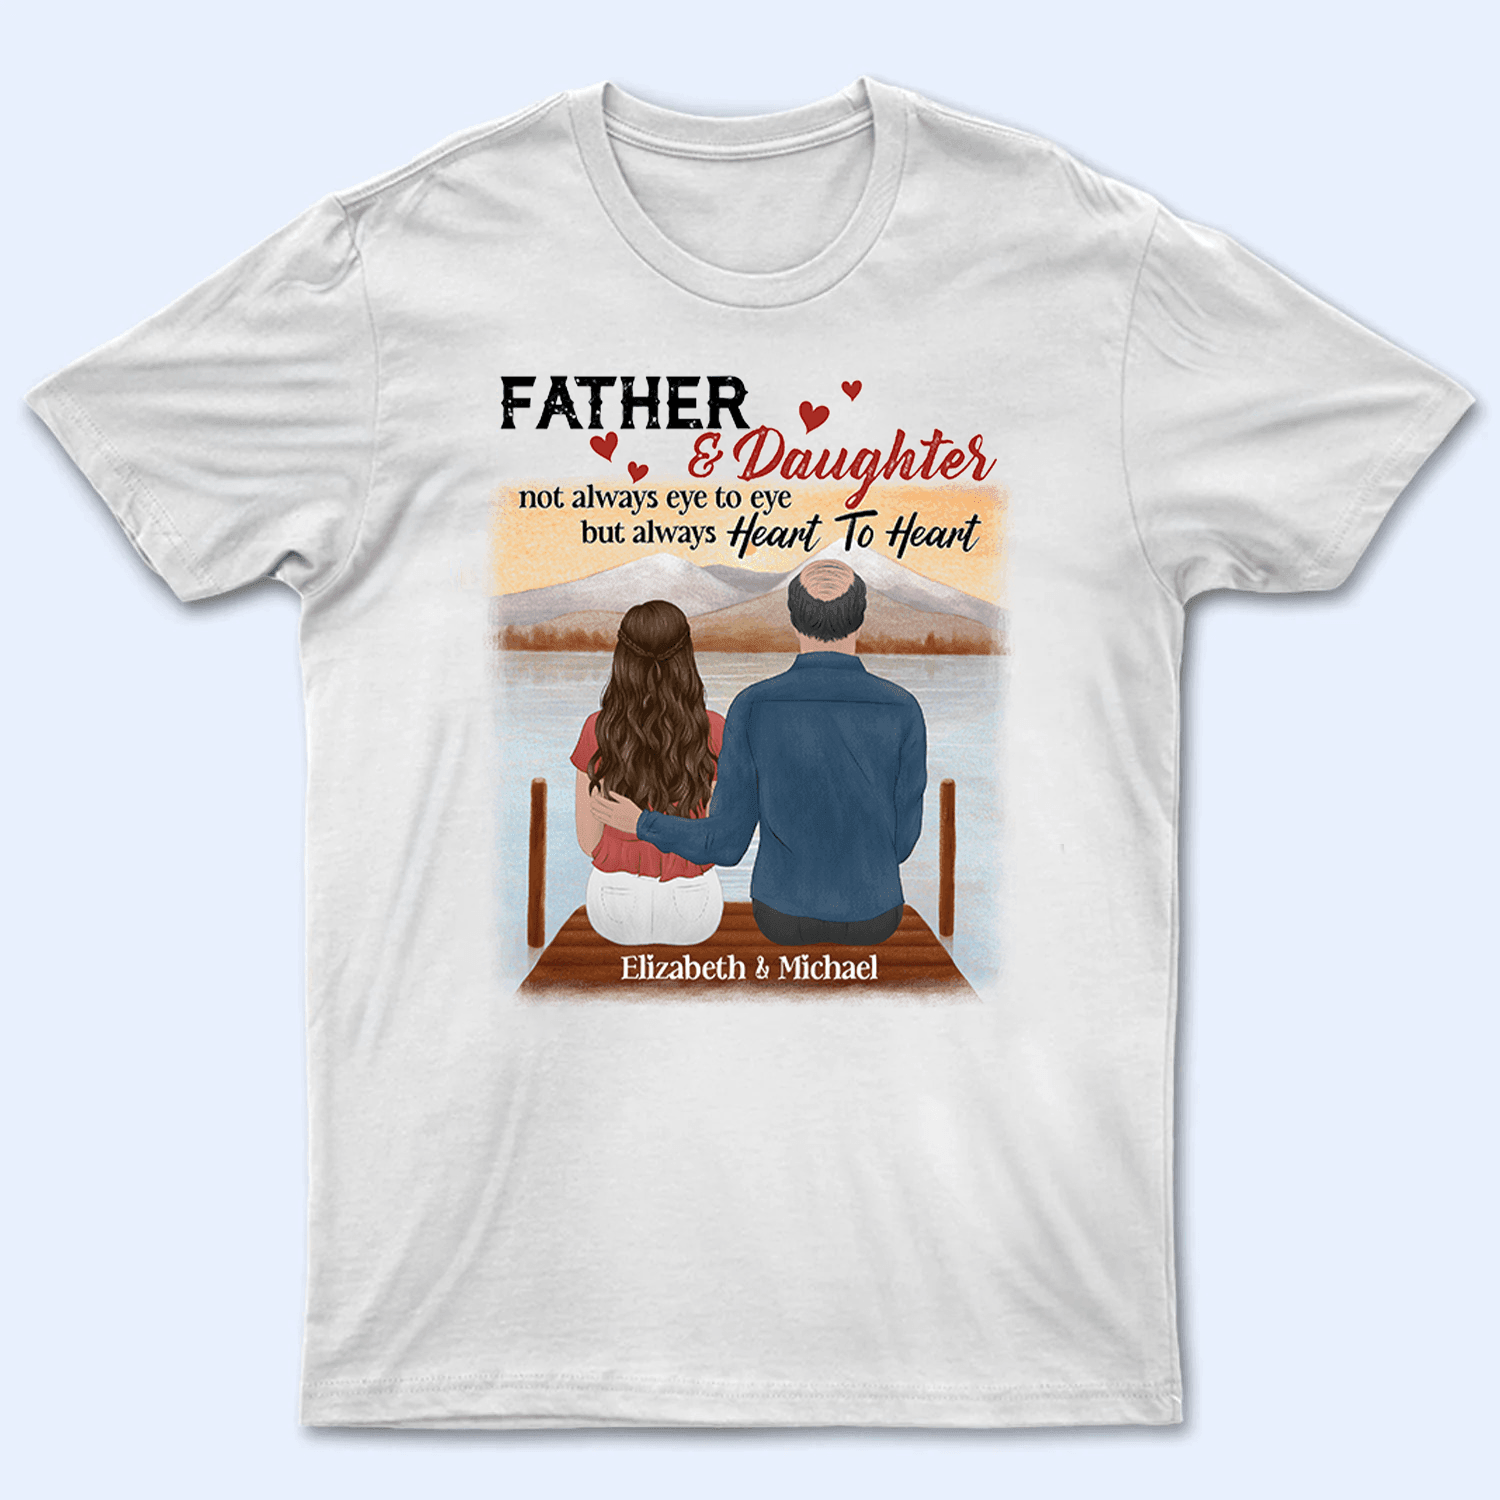 Father & Daughter/Son - Personalized Custom T Shirt - Father's Day Gift for Dad, Father, Daddy, Dada, Dad Jokes - Suzitee Store